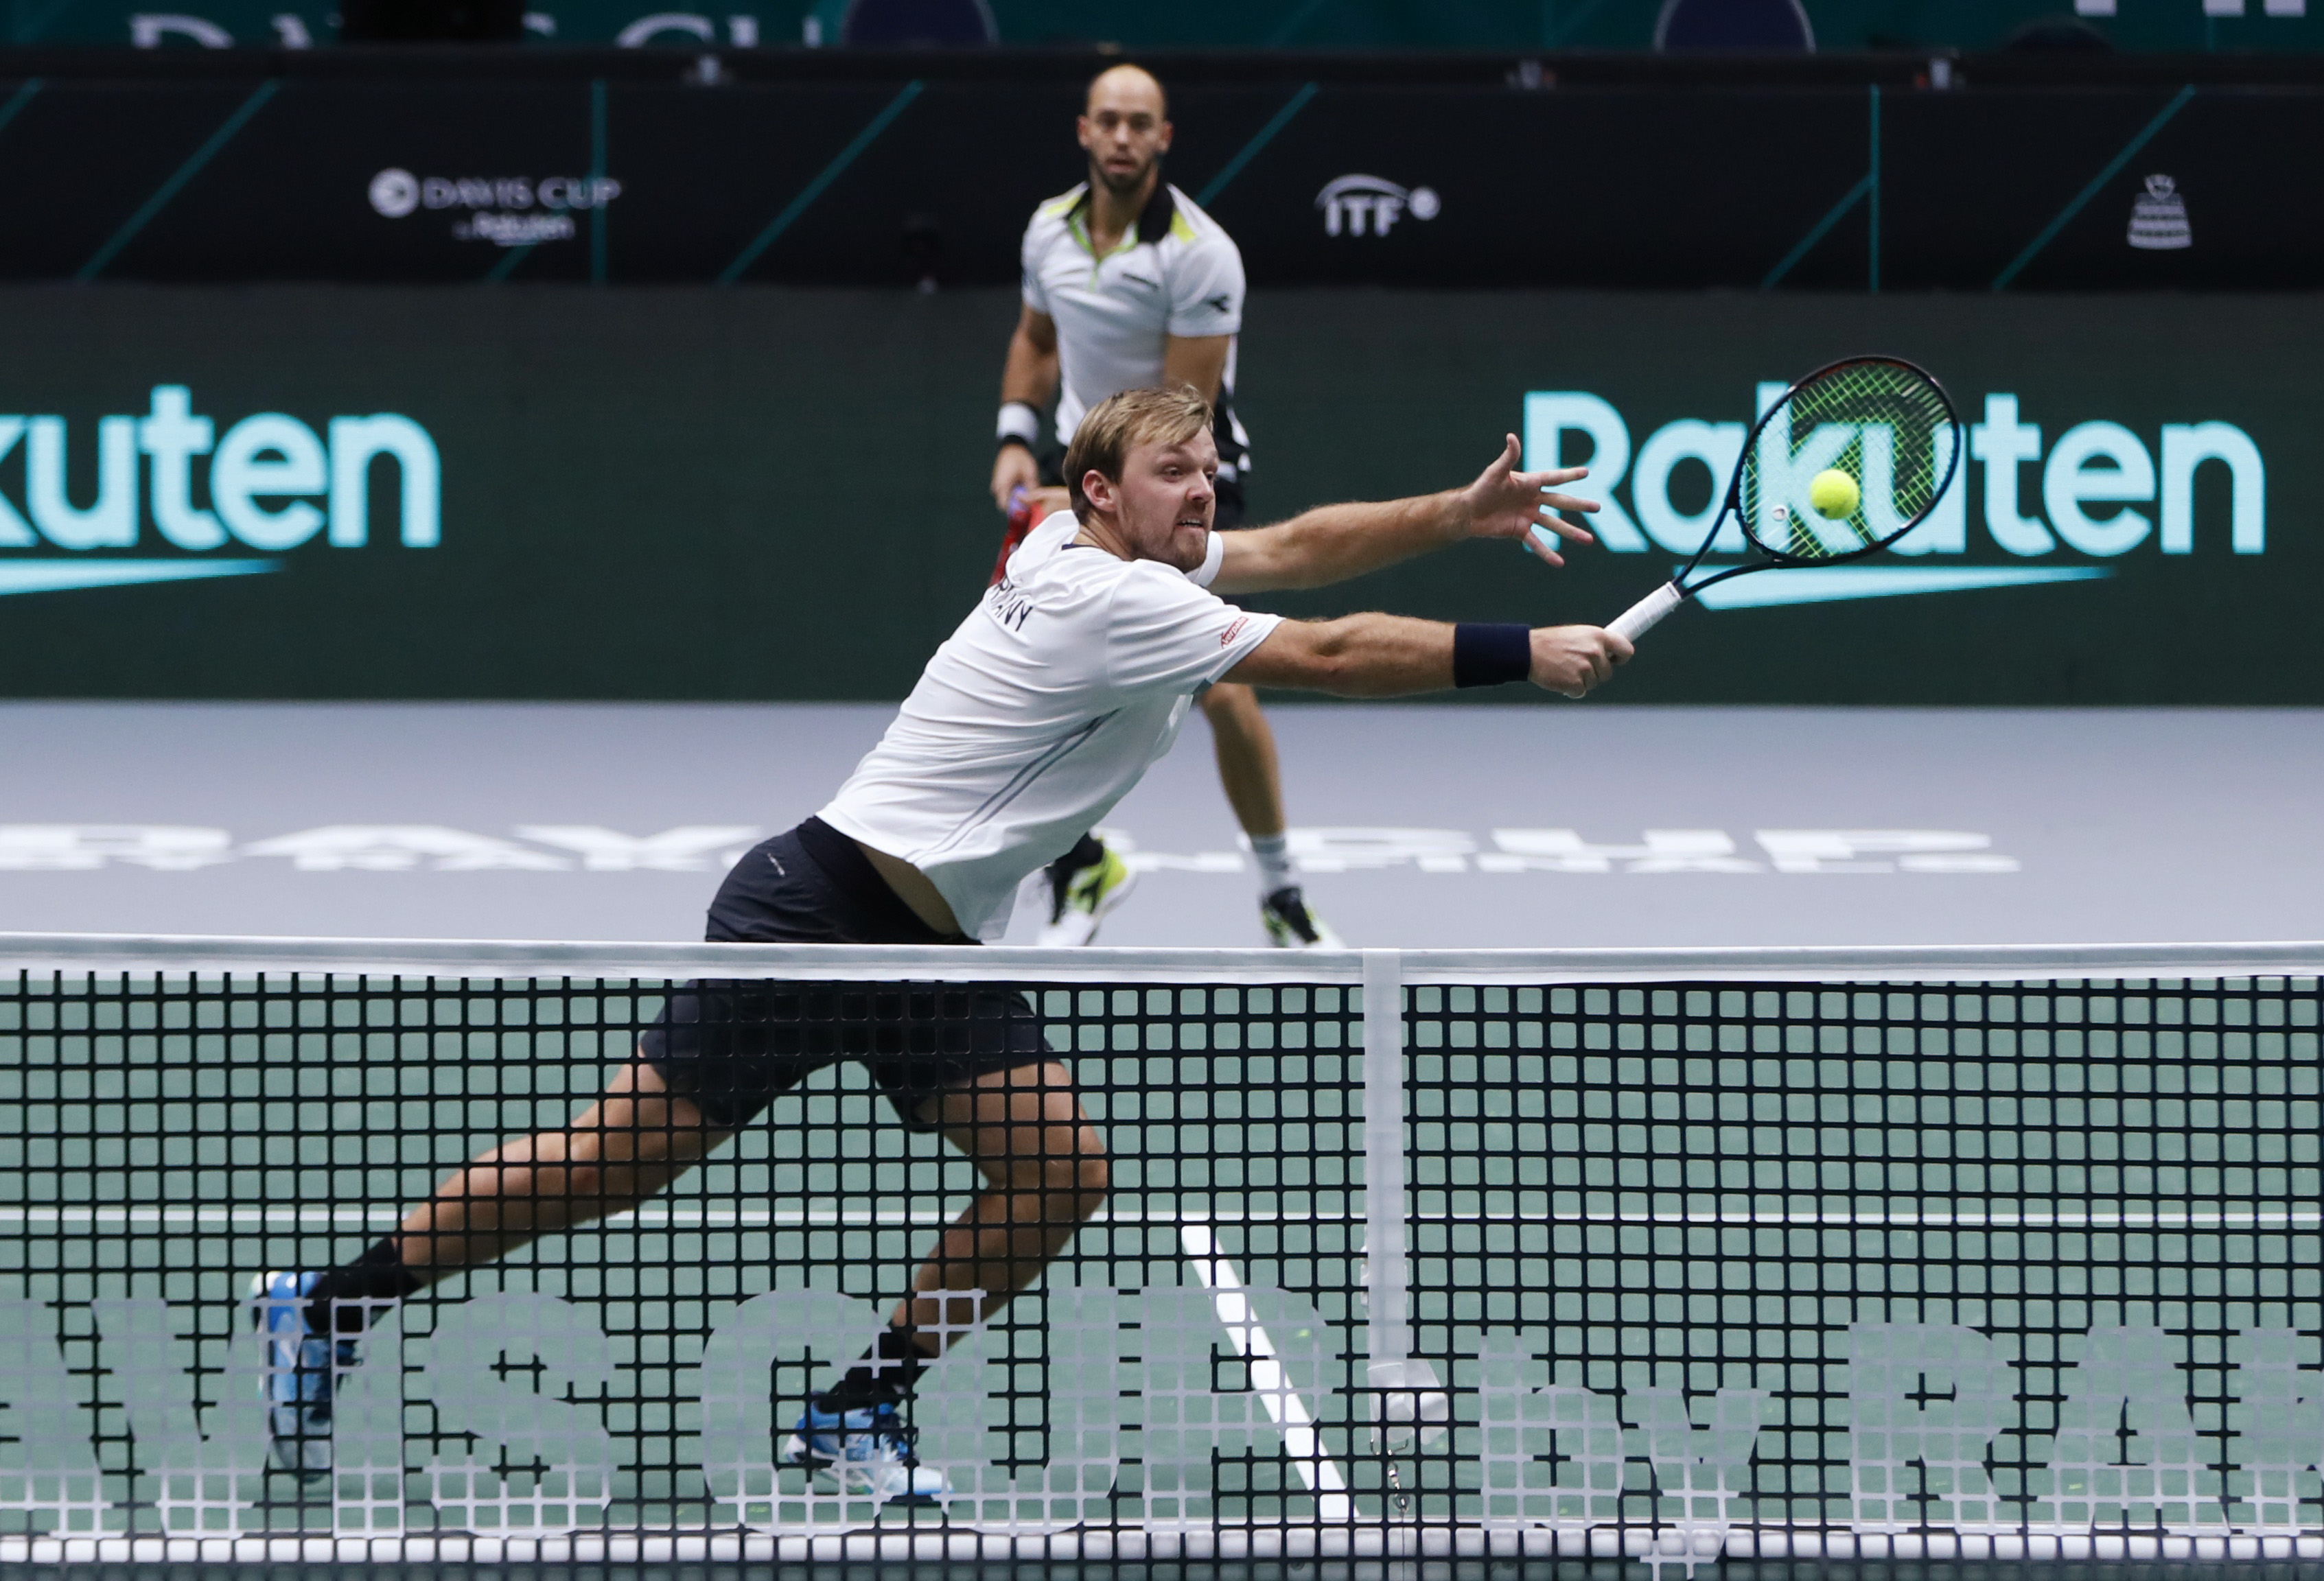 Tennis - Davis Cup Quarter-Final - Great Britain v Germany - Olympiahalle, Innsbruck, Austria - November 30, 2021 Germany's Kevin Krawietz and Tim Puetz in action during their match Great Britain's Joe Salisbury and Neal Skupski REUTERS/Leonhard Foeger